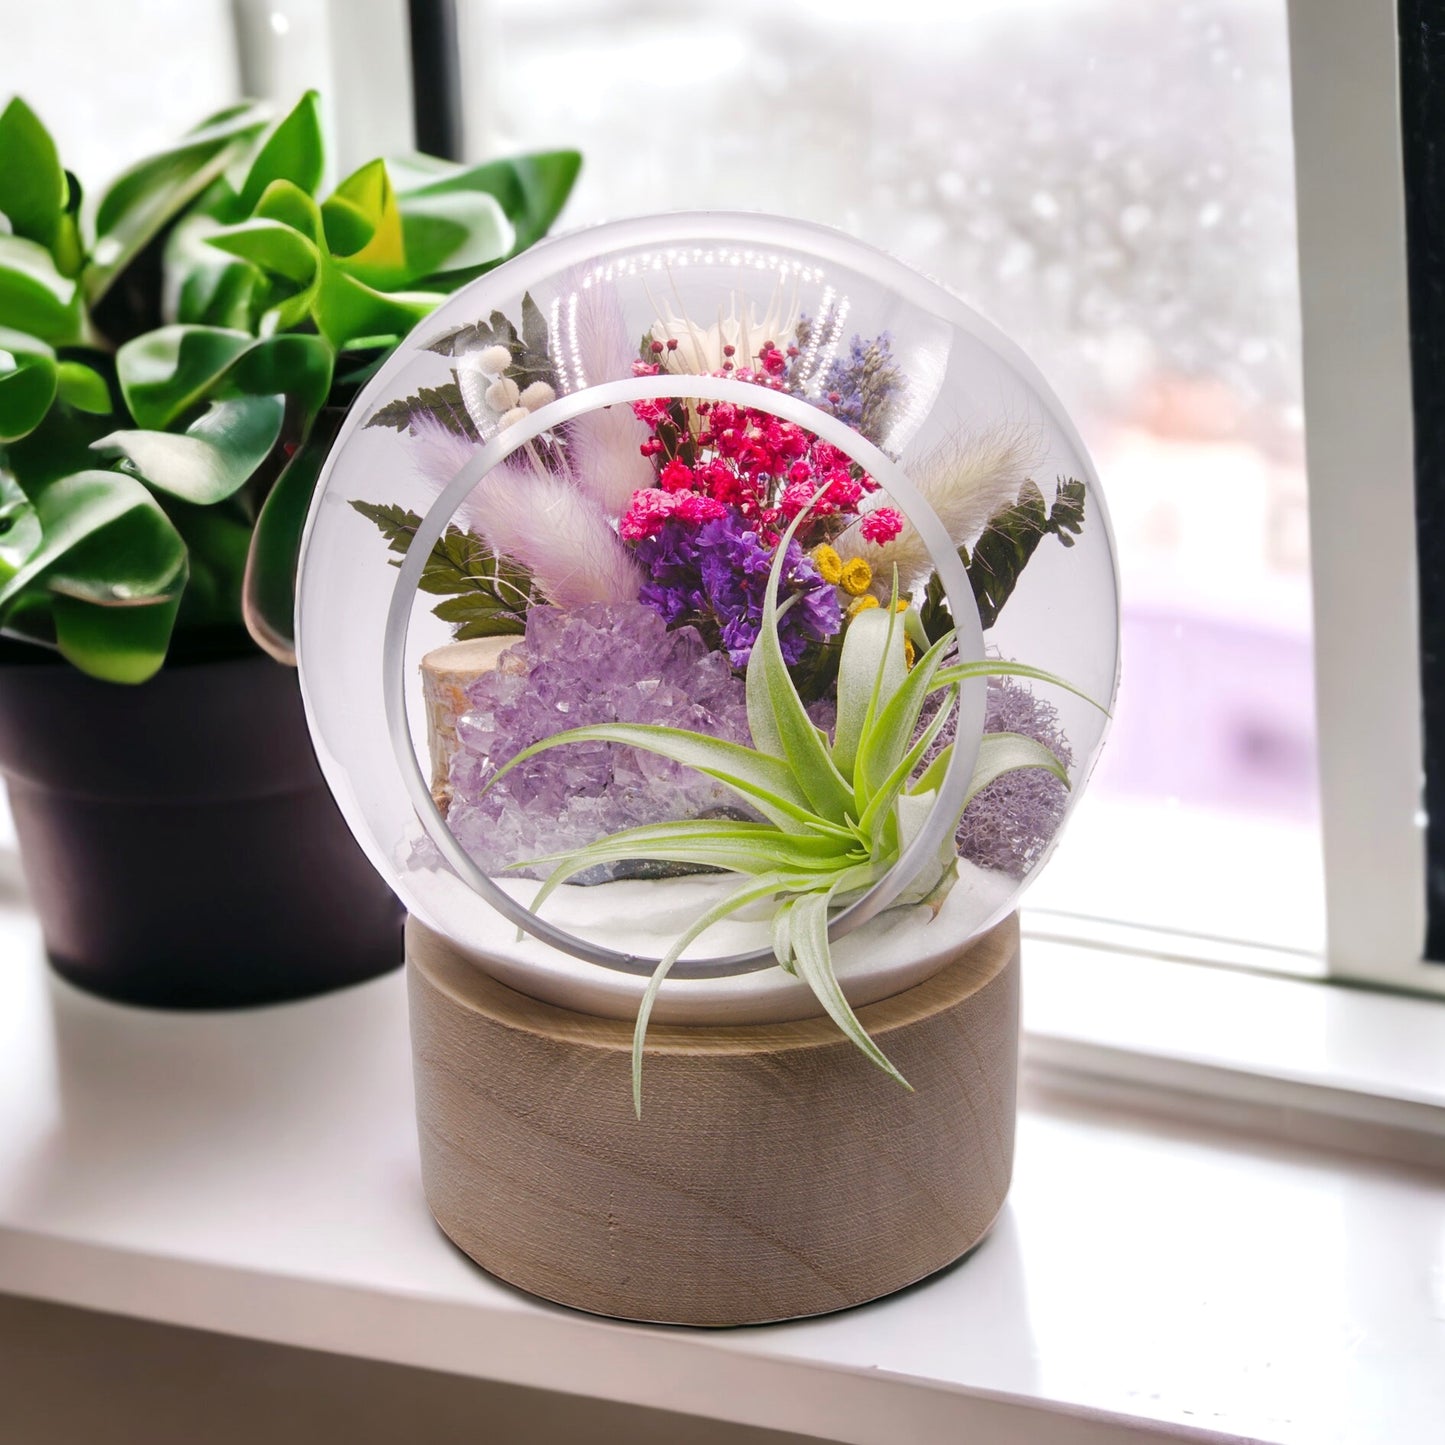 Glass bubble terrarium on a wooden base with dried flowers, sand, moss, wood and an airplant along with a raw amethyst crystal